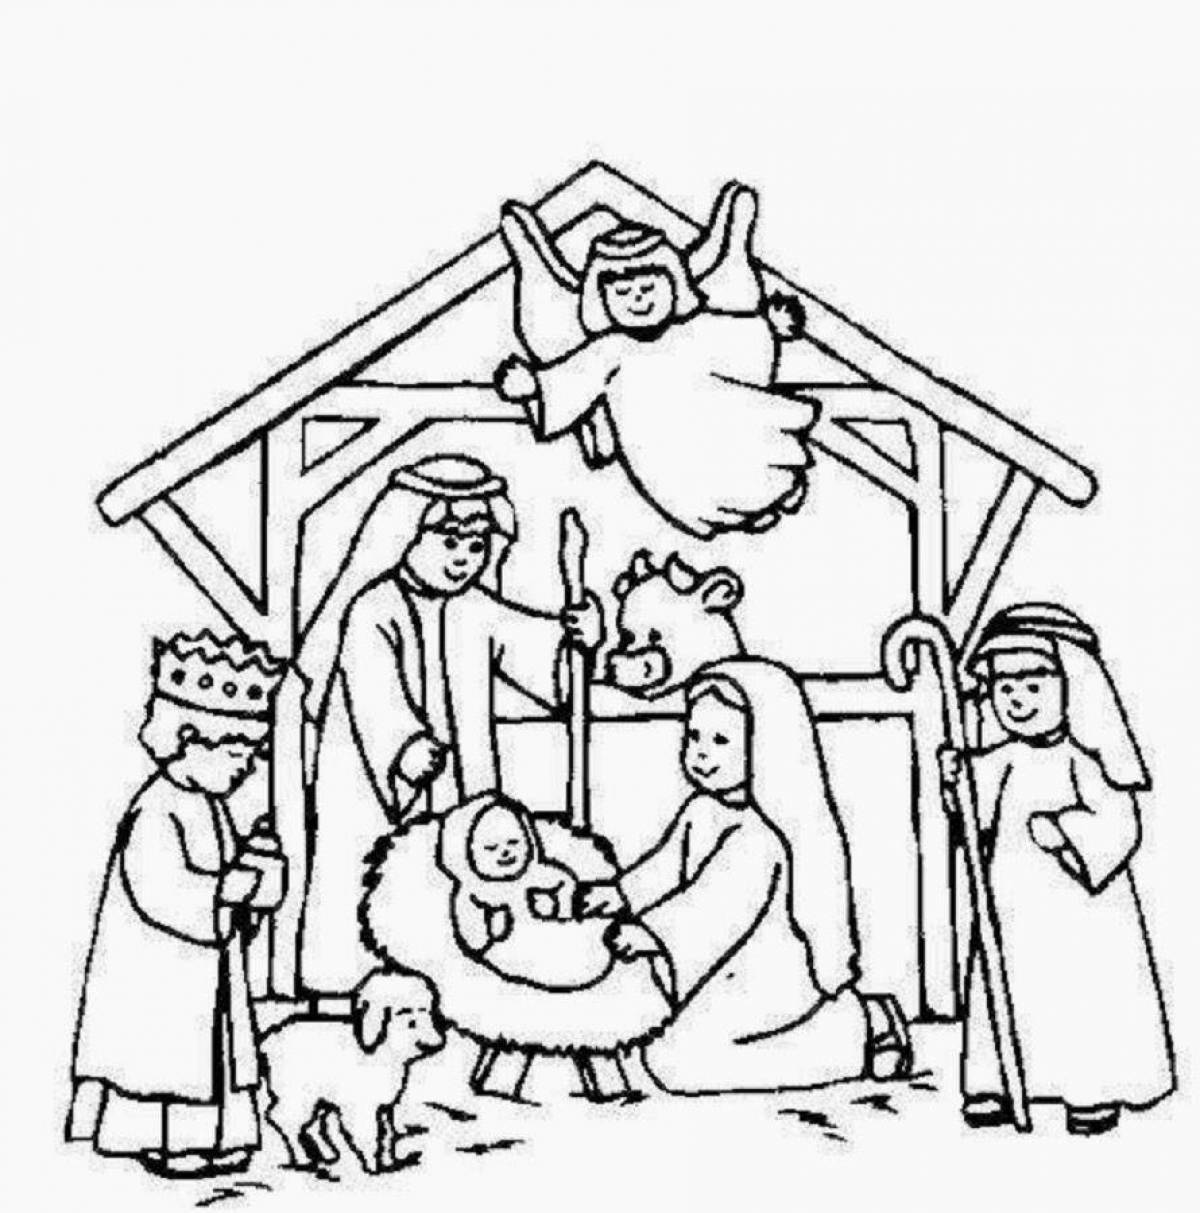 Exciting carol coloring page